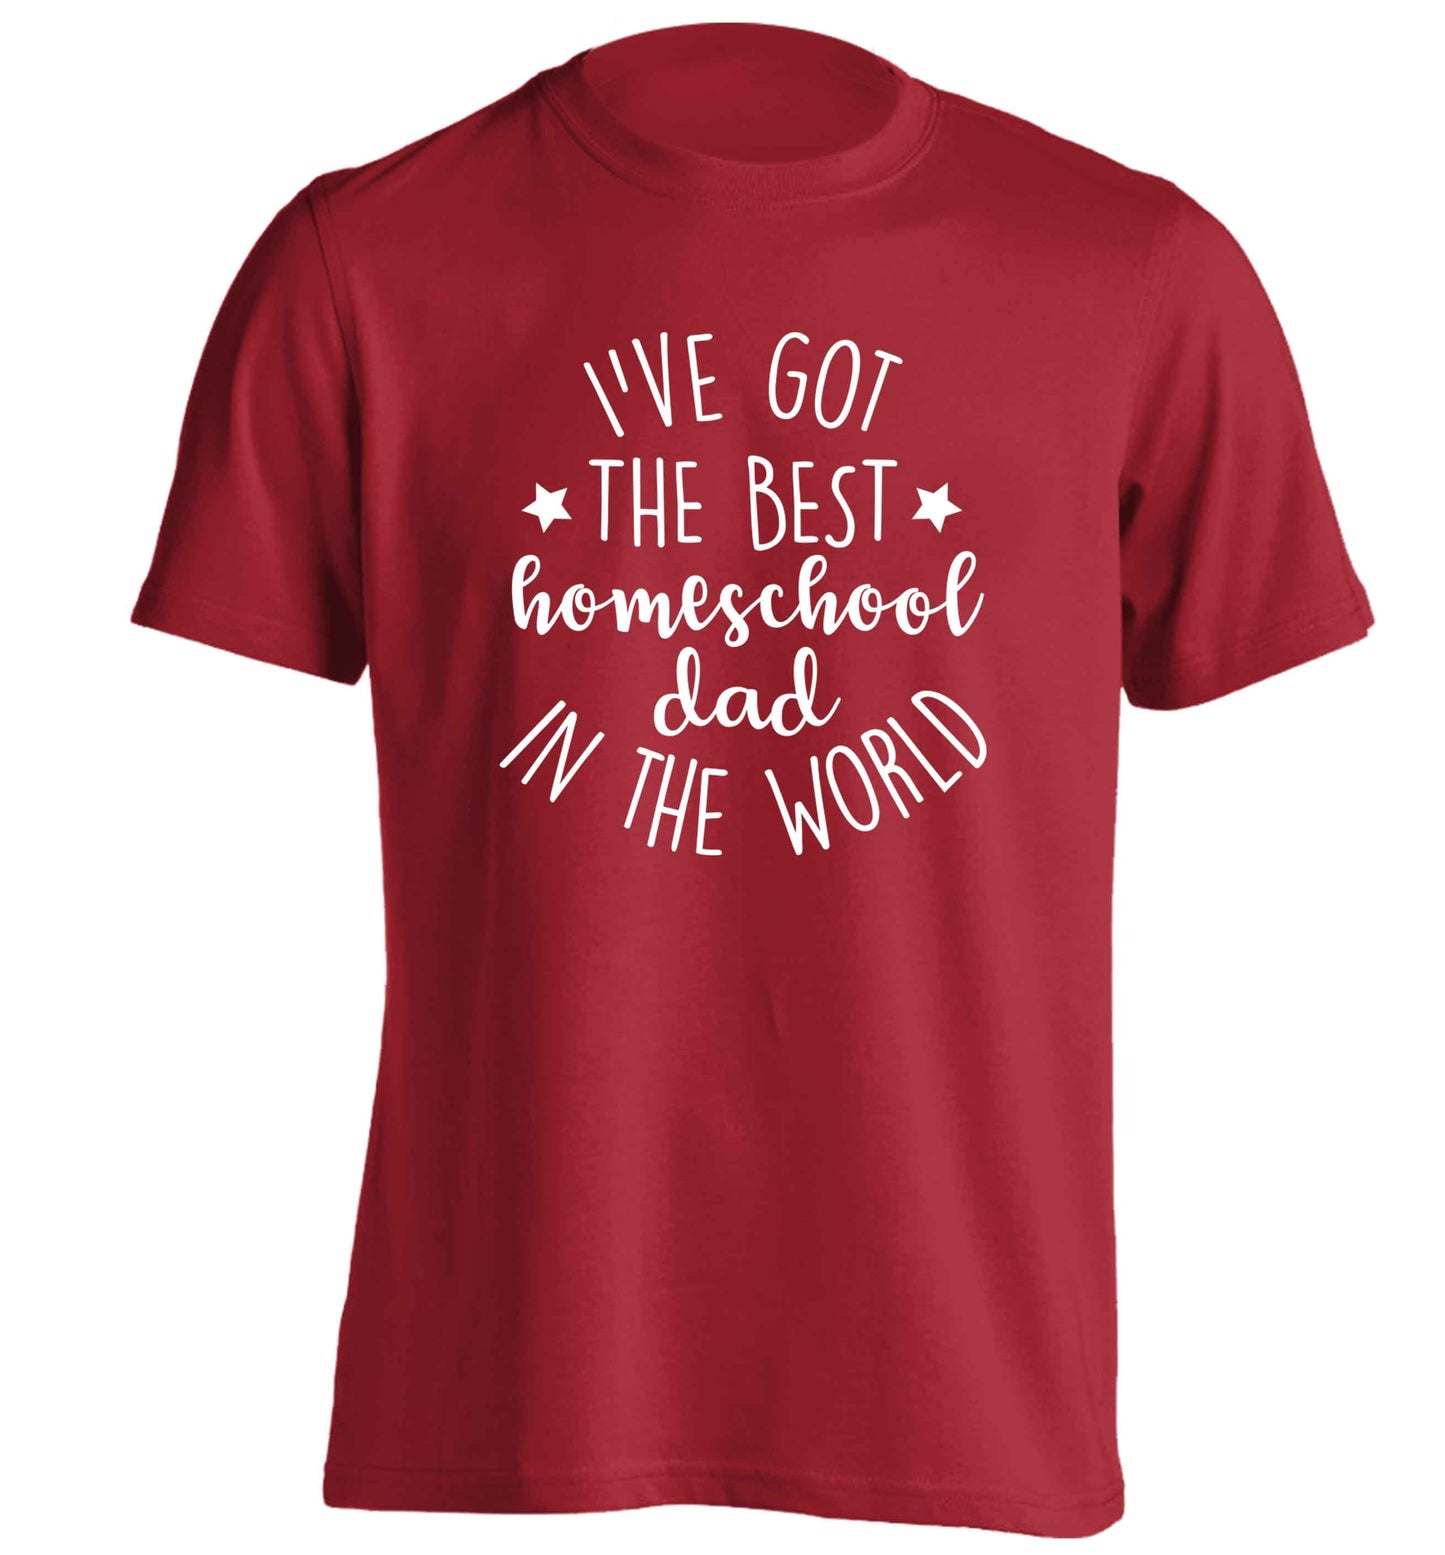 I've got the best homeschool dad in the world adults unisex red Tshirt 2XL